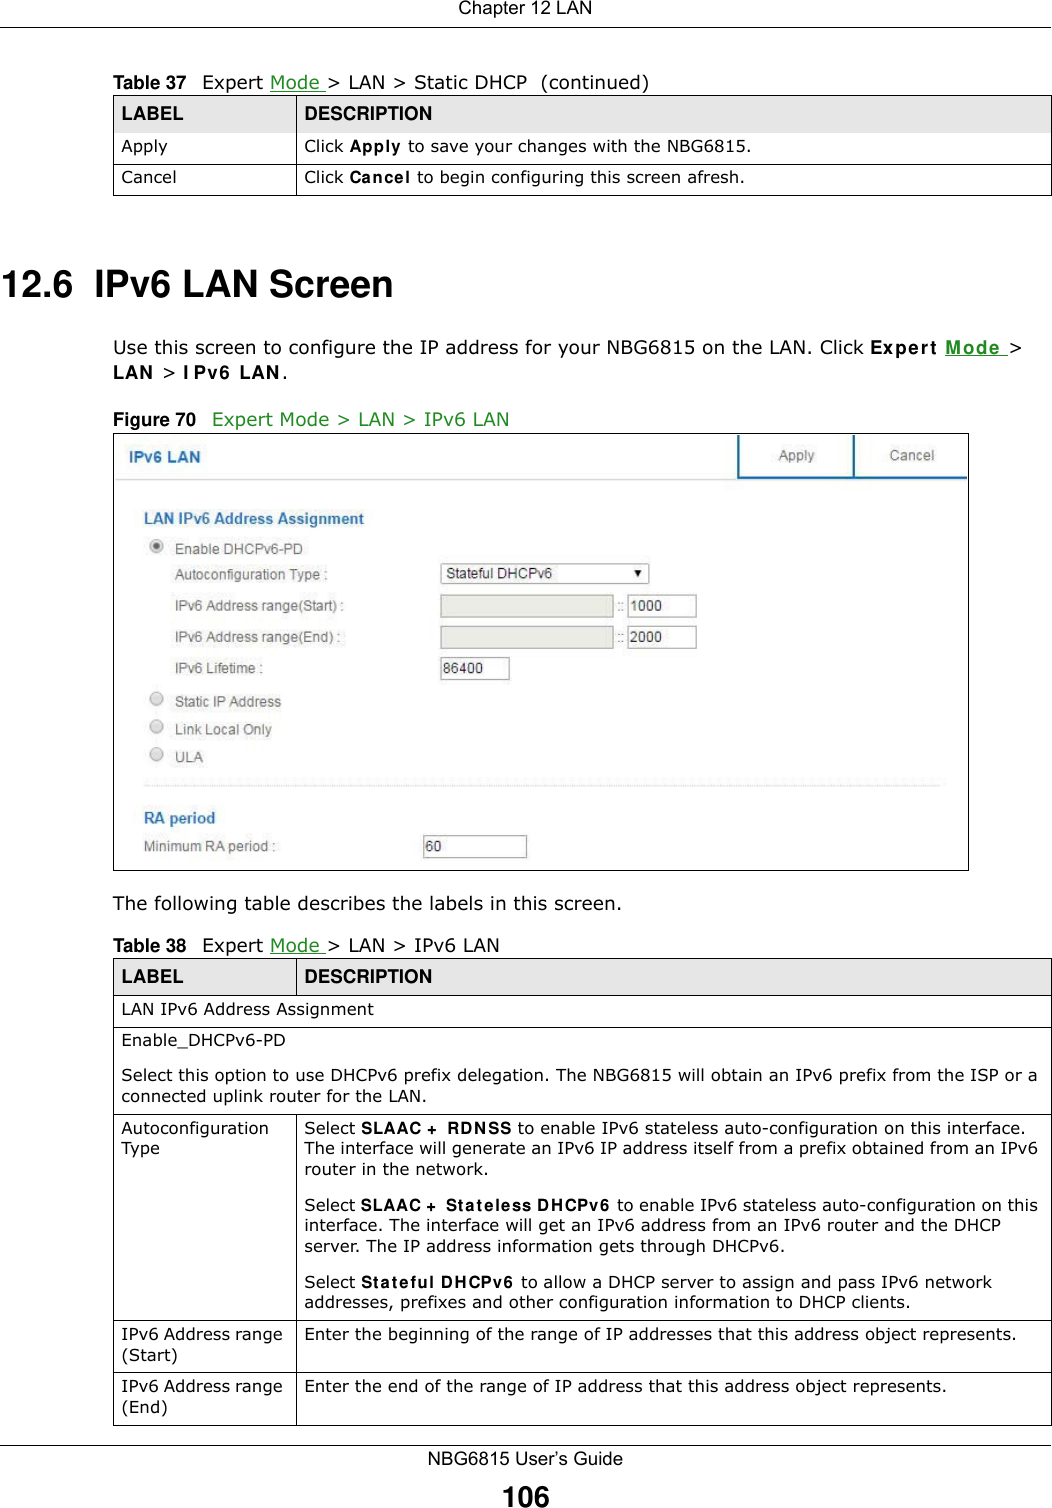 Chapter 12 LANNBG6815 User’s Guide10612.6  IPv6 LAN ScreenUse this screen to configure the IP address for your NBG6815 on the LAN. Click Expert Mode &gt; LAN &gt; IPv6 LAN.Figure 70   Expert Mode &gt; LAN &gt; IPv6 LAN The following table describes the labels in this screen.Apply Click Apply to save your changes with the NBG6815.Cancel Click Cancel to begin configuring this screen afresh.Table 37   Expert Mode &gt; LAN &gt; Static DHCP  (continued)LABEL DESCRIPTIONTable 38   Expert Mode &gt; LAN &gt; IPv6 LANLABEL DESCRIPTIONLAN IPv6 Address AssignmentEnable_DHCPv6-PD Select this option to use DHCPv6 prefix delegation. The NBG6815 will obtain an IPv6 prefix from the ISP or a connected uplink router for the LAN.Autoconfiguration TypeSelect SLAAC + RDNSS to enable IPv6 stateless auto-configuration on this interface. The interface will generate an IPv6 IP address itself from a prefix obtained from an IPv6 router in the network.Select SLAAC + Stateless DHCPv6 to enable IPv6 stateless auto-configuration on this interface. The interface will get an IPv6 address from an IPv6 router and the DHCP server. The IP address information gets through DHCPv6.Select Stateful DHCPv6 to allow a DHCP server to assign and pass IPv6 network addresses, prefixes and other configuration information to DHCP clients.IPv6 Address range (Start)Enter the beginning of the range of IP addresses that this address object represents.IPv6 Address range (End) Enter the end of the range of IP address that this address object represents.